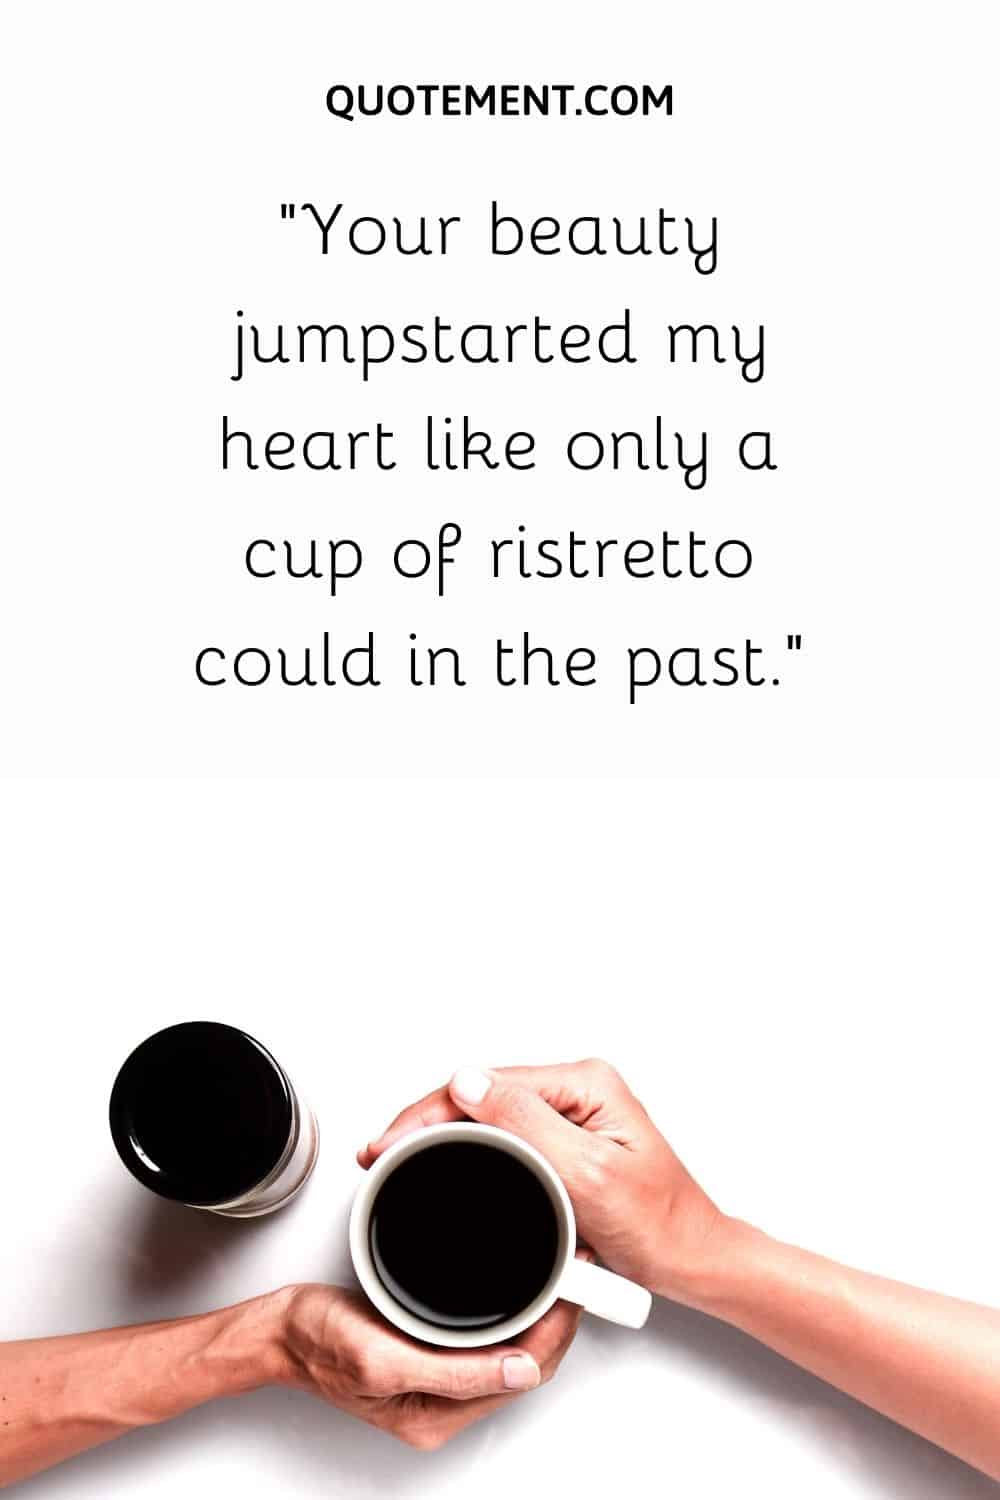 Your beauty jumpstarted my heart like only a cup of ristretto could in the past